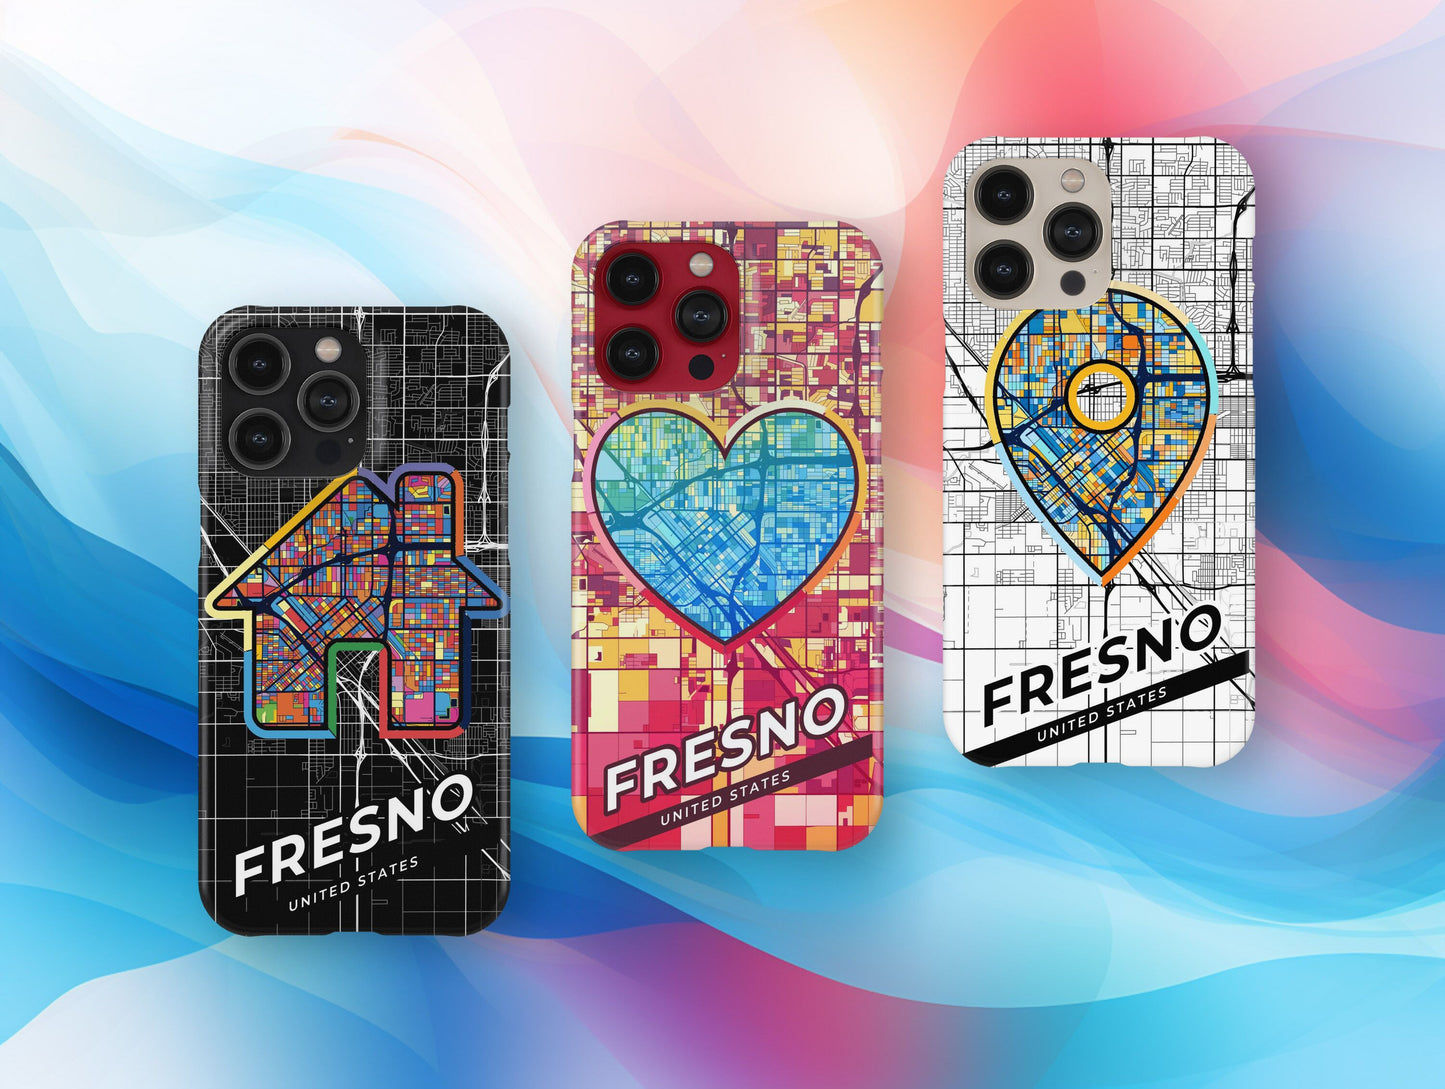 Fresno California slim phone case with colorful icon. Birthday, wedding or housewarming gift. Couple match cases.